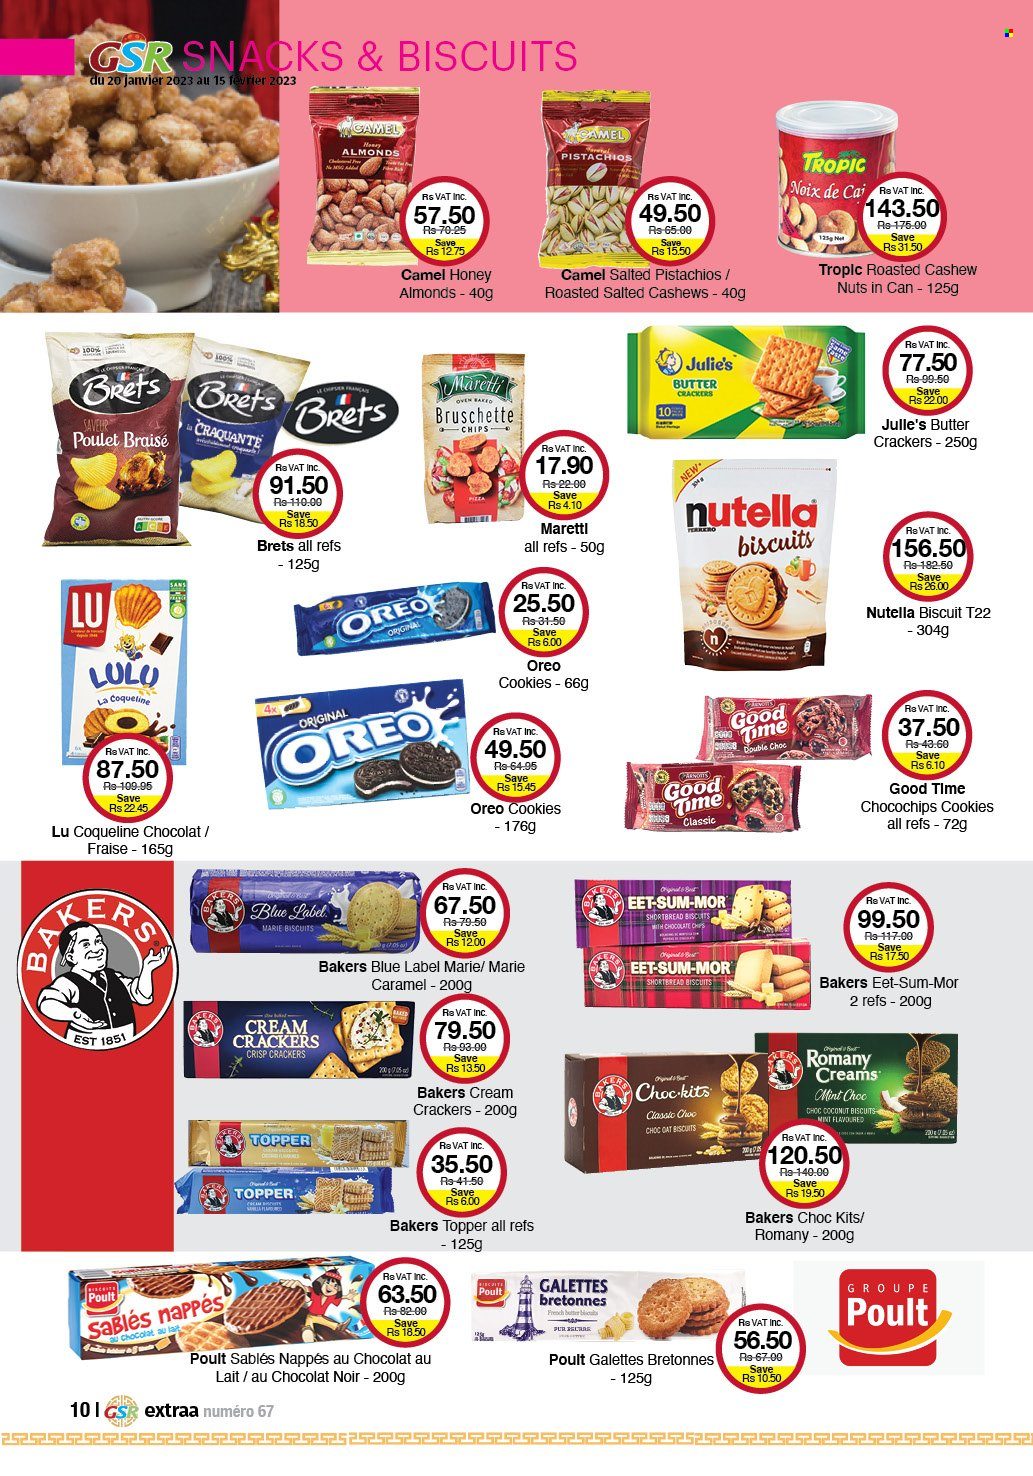 thumbnail - GSR Catalogue - 20.01.2023 - 15.02.2023 - Sales products - cookies, snack, crackers, biscuit, Julie's, caramel, honey, almonds, cashews, pistachios, Camel, Bakers, Nutella, Oreo. Page 10.